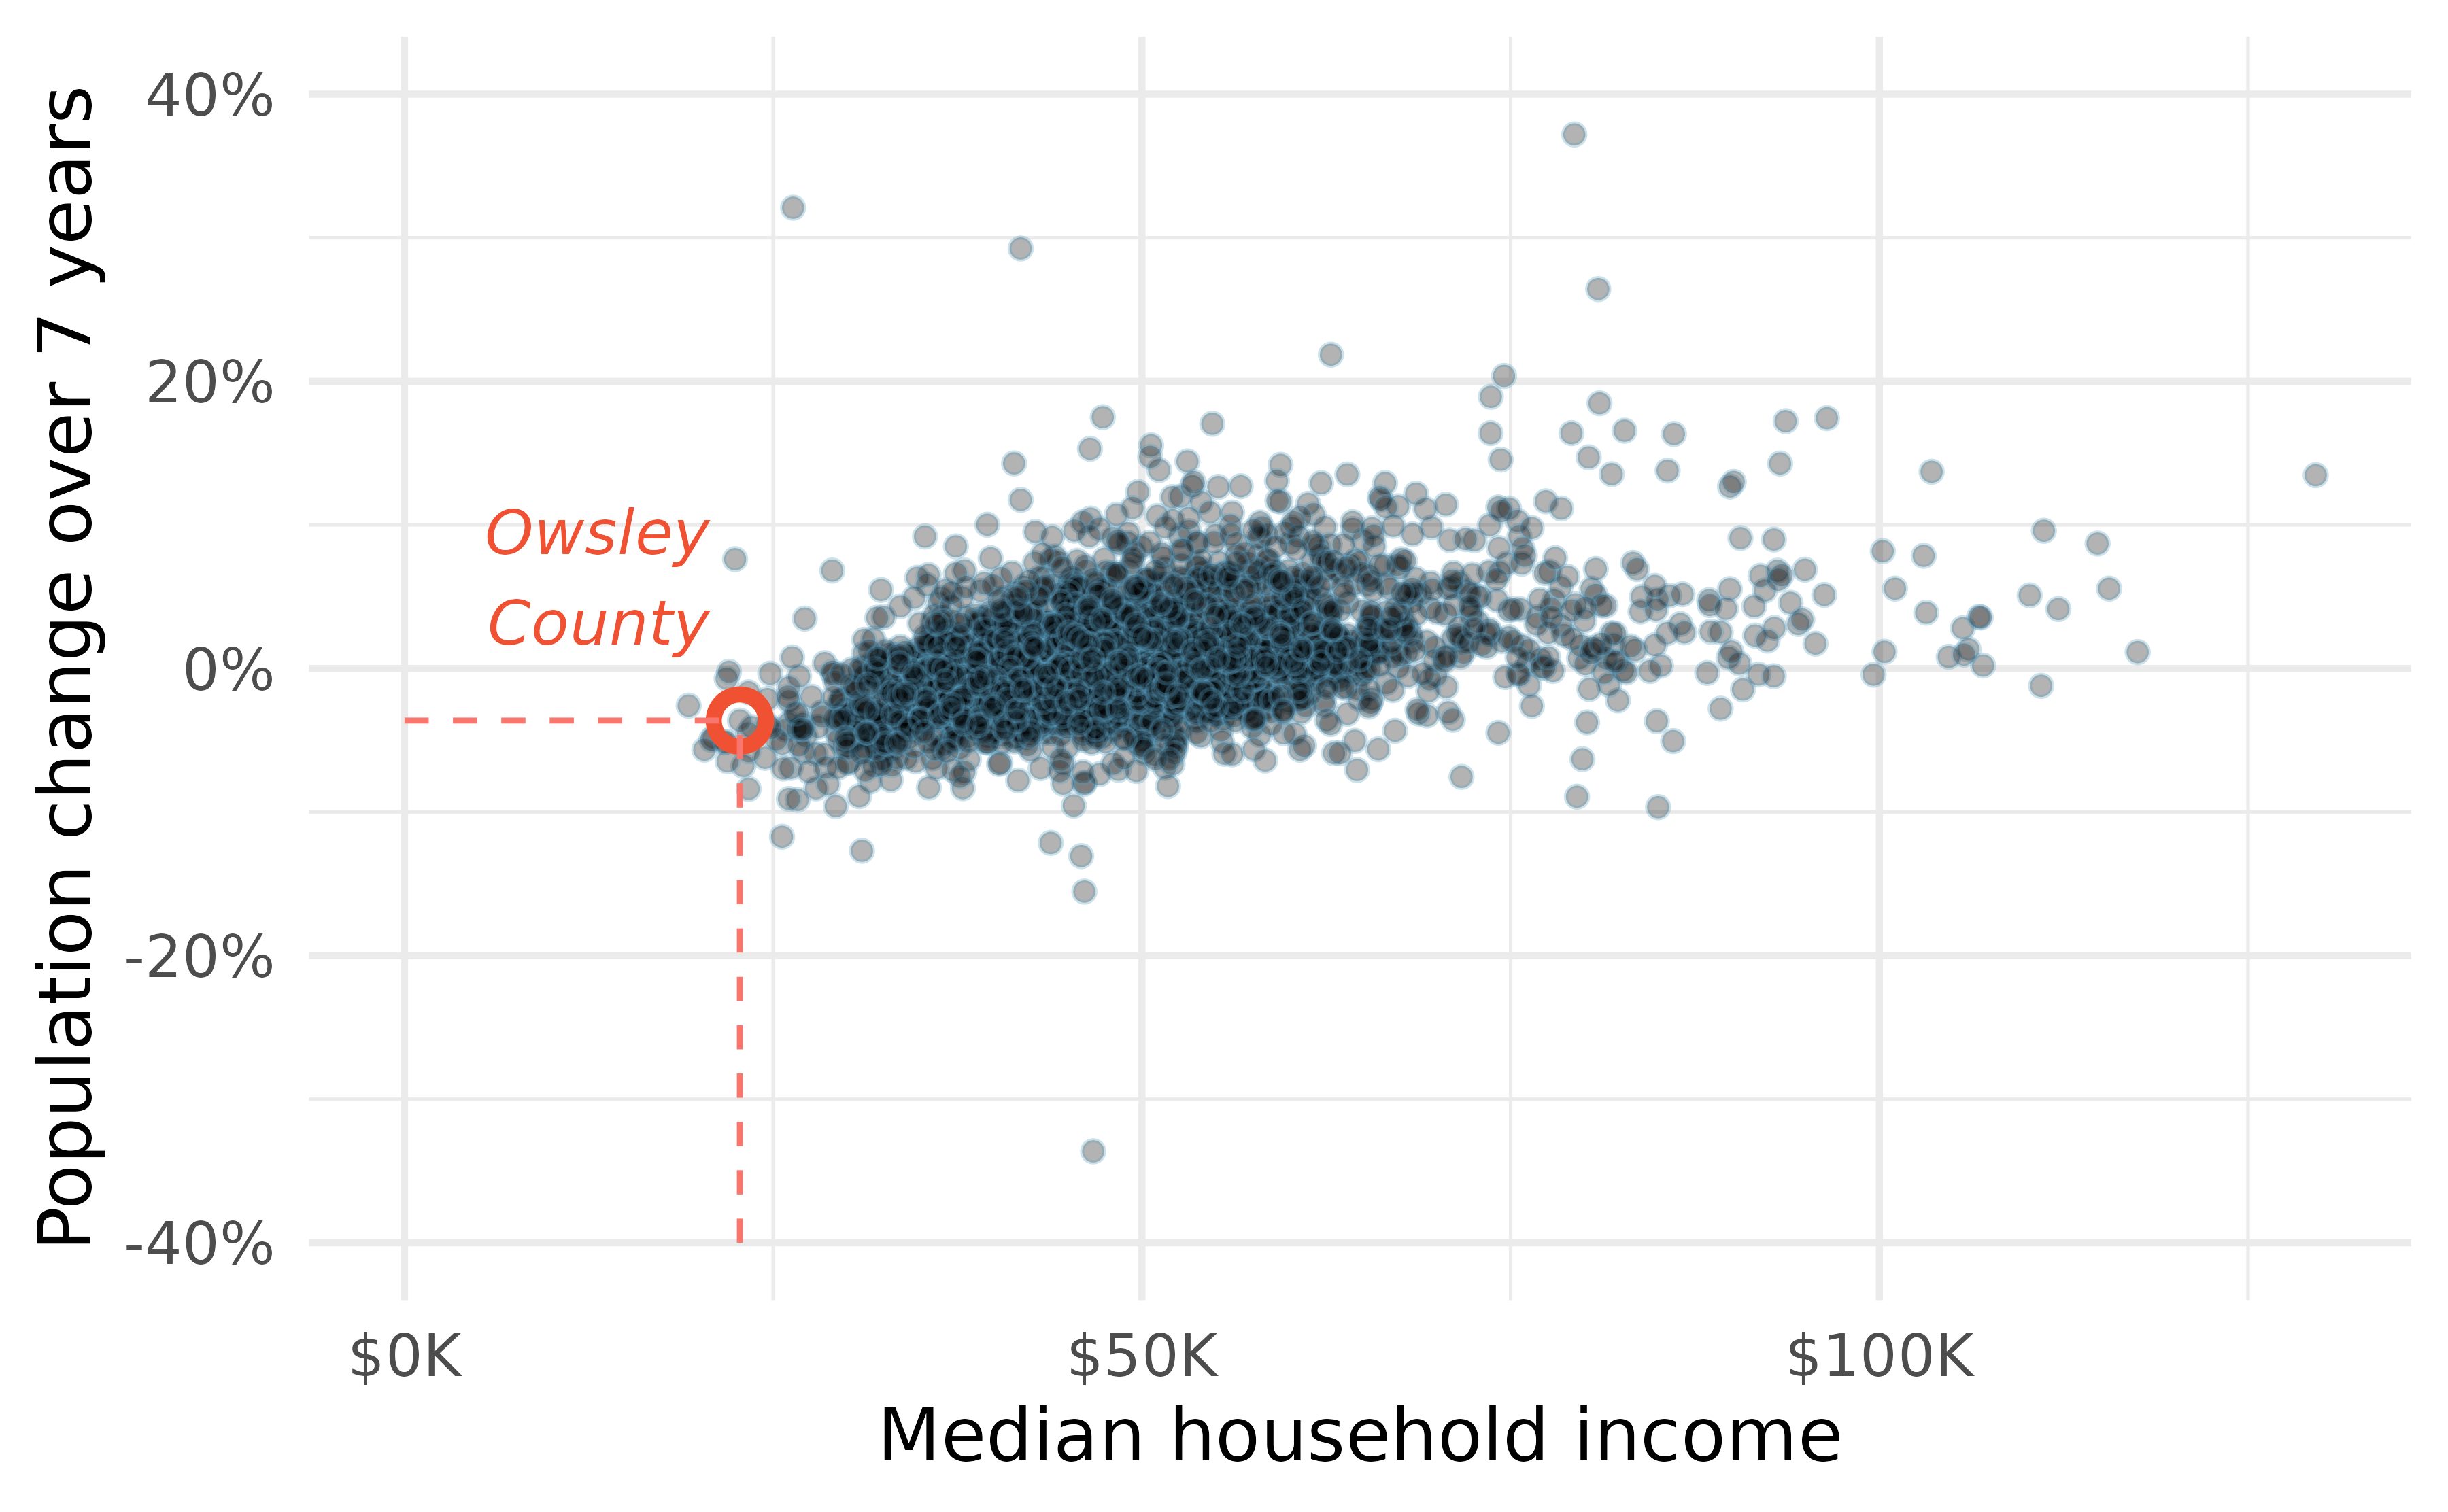 A scatterplot showing population change (on the y-axis) against median household income (on the x-axis). Owsley County of Kentucky is highlighted, which lost 3.63% of its population from 2010 to 2017 and had median household income of $22,736.